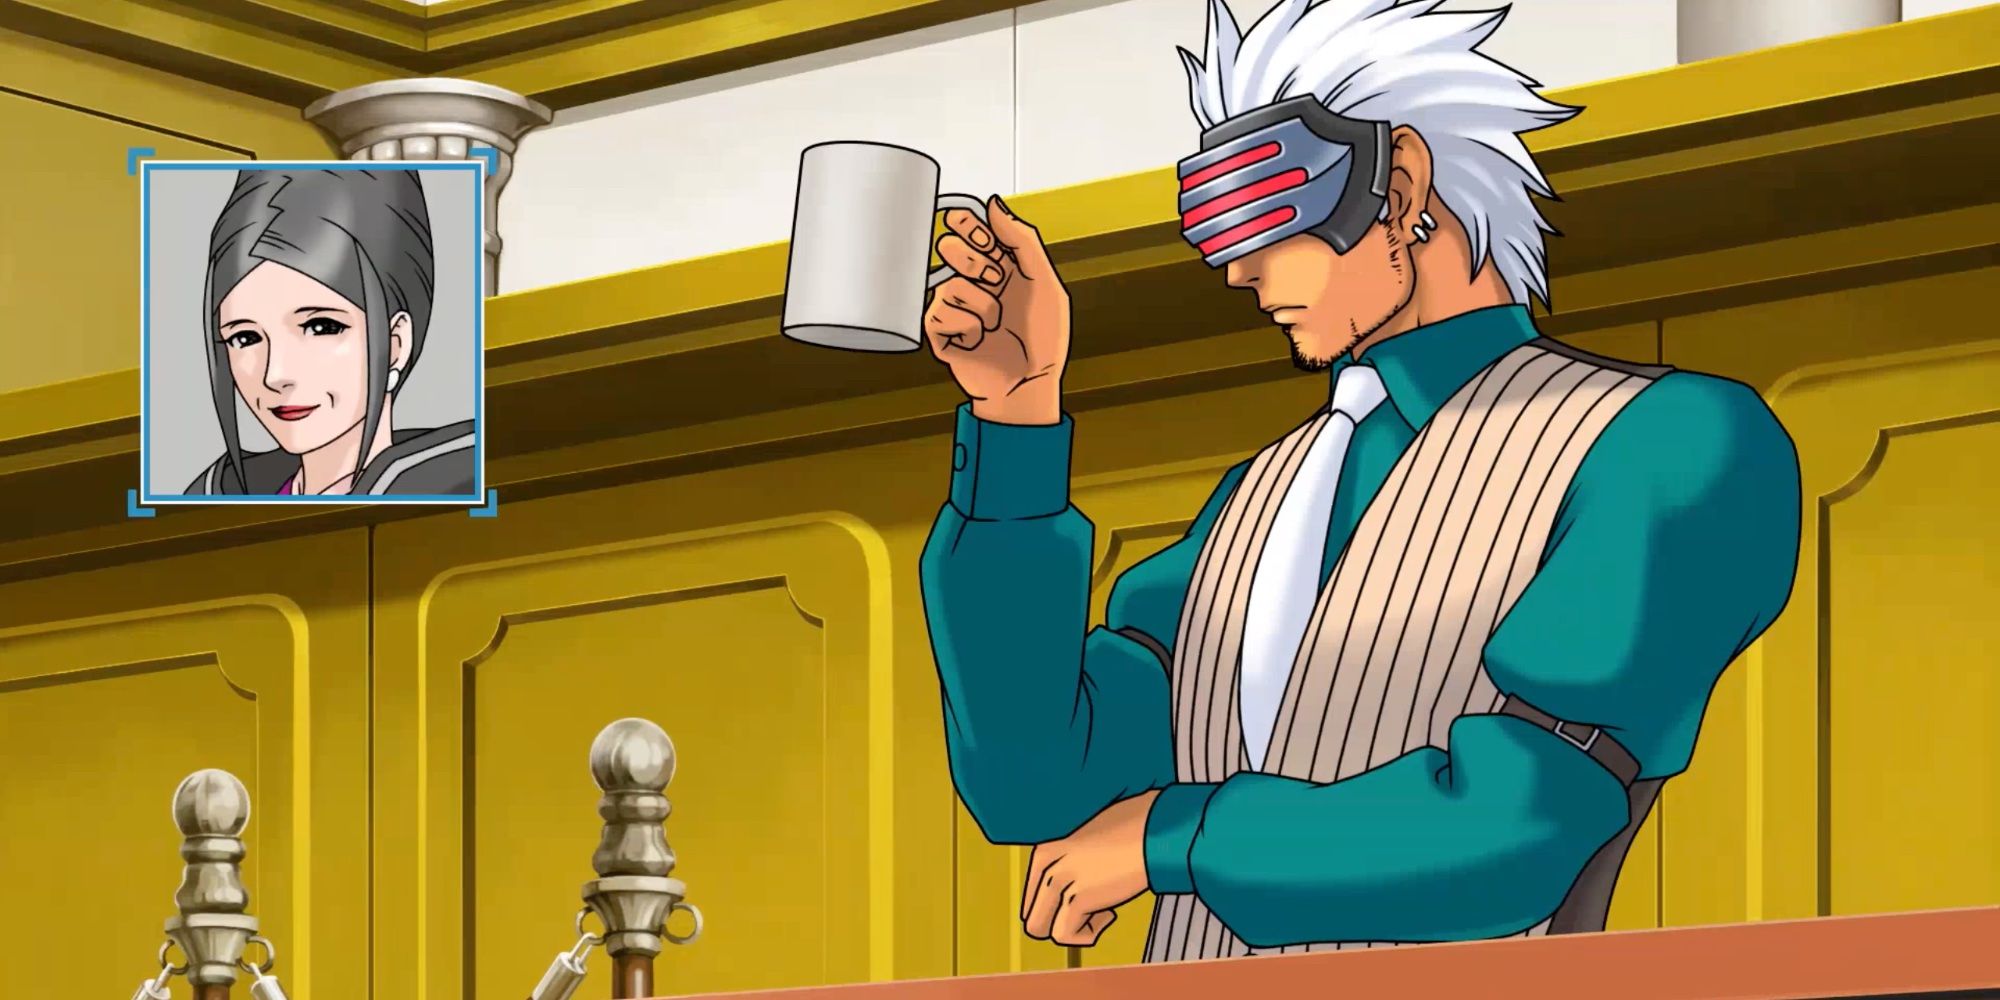 Ace Attorney 3- Trials and Tribulations Godot holding a cup of coffee during a trial